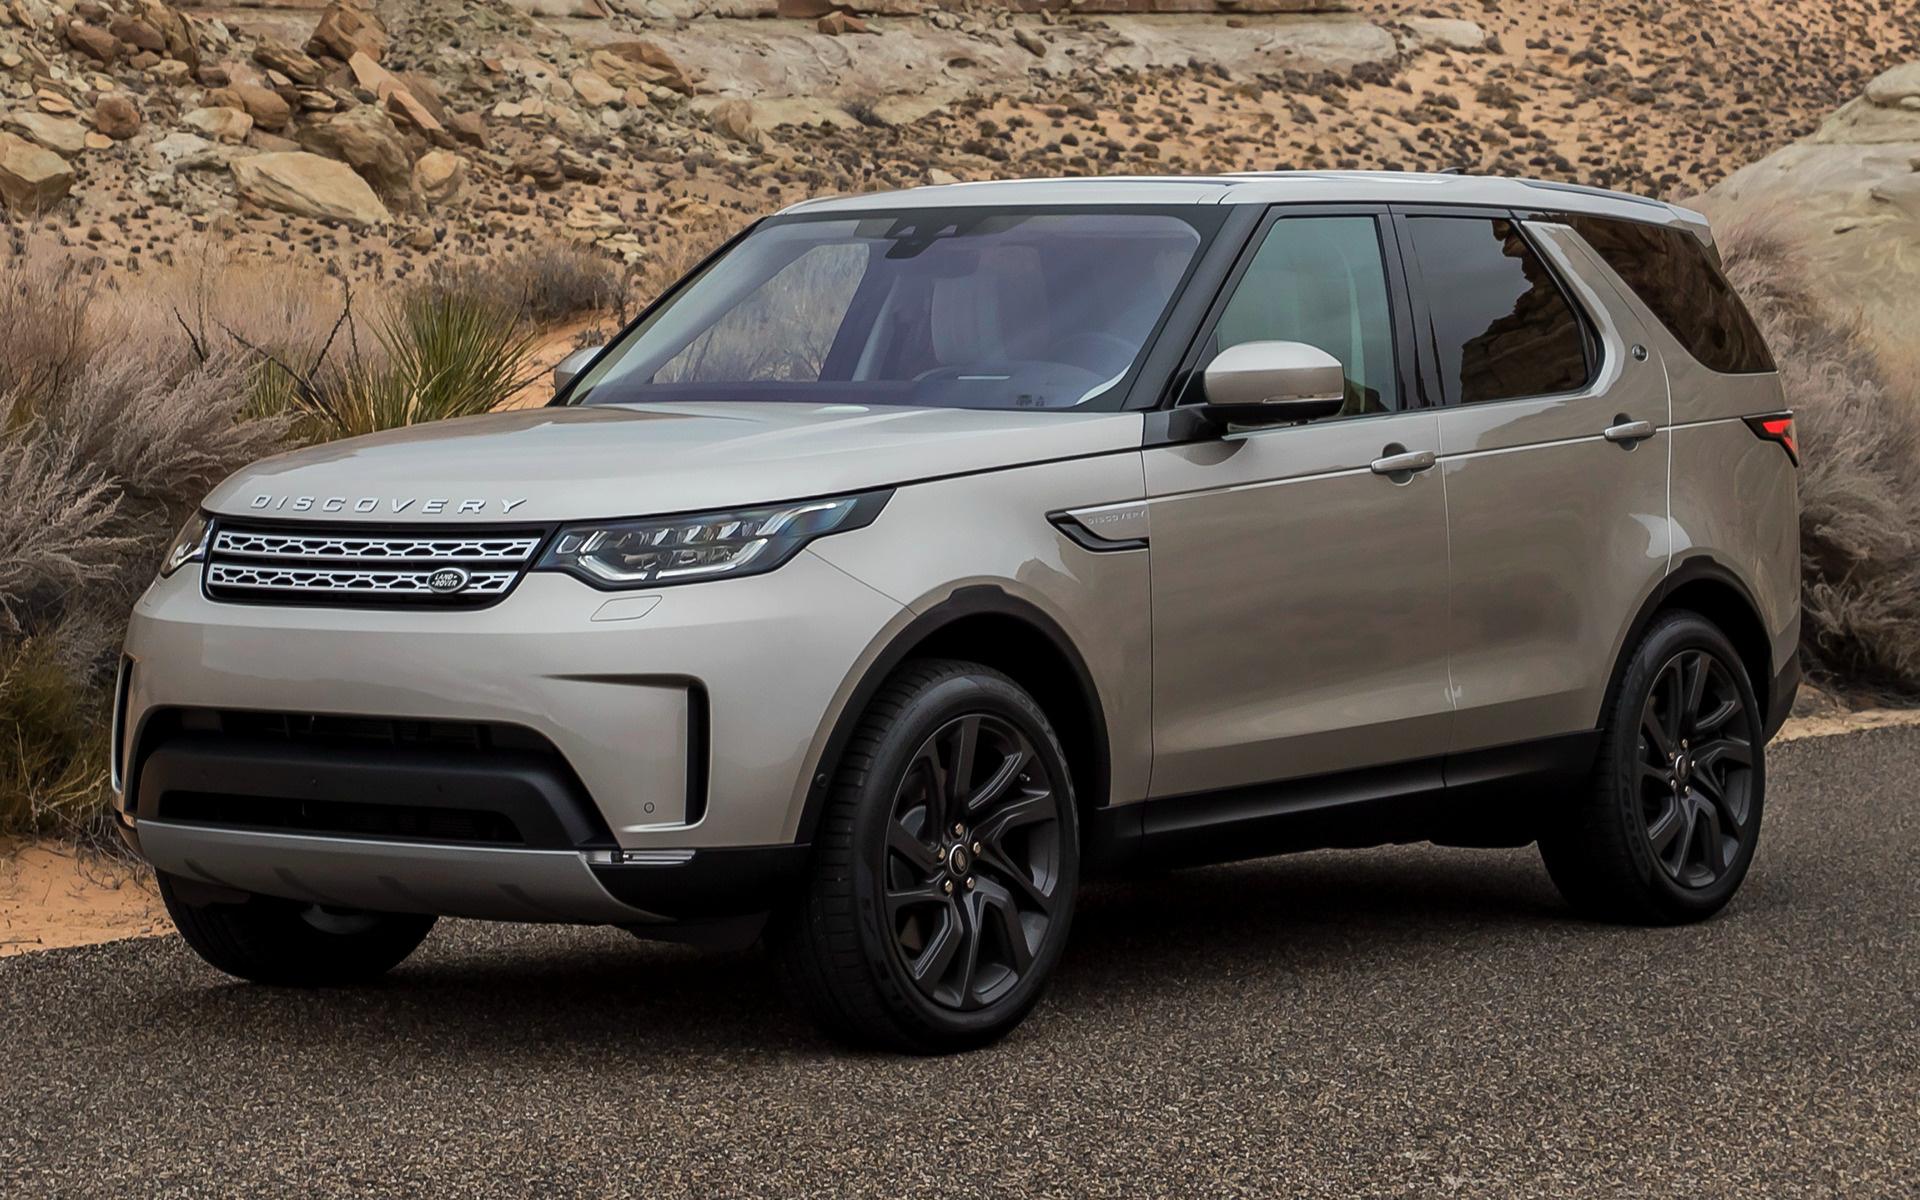 Land Rover Discovery and HD Image